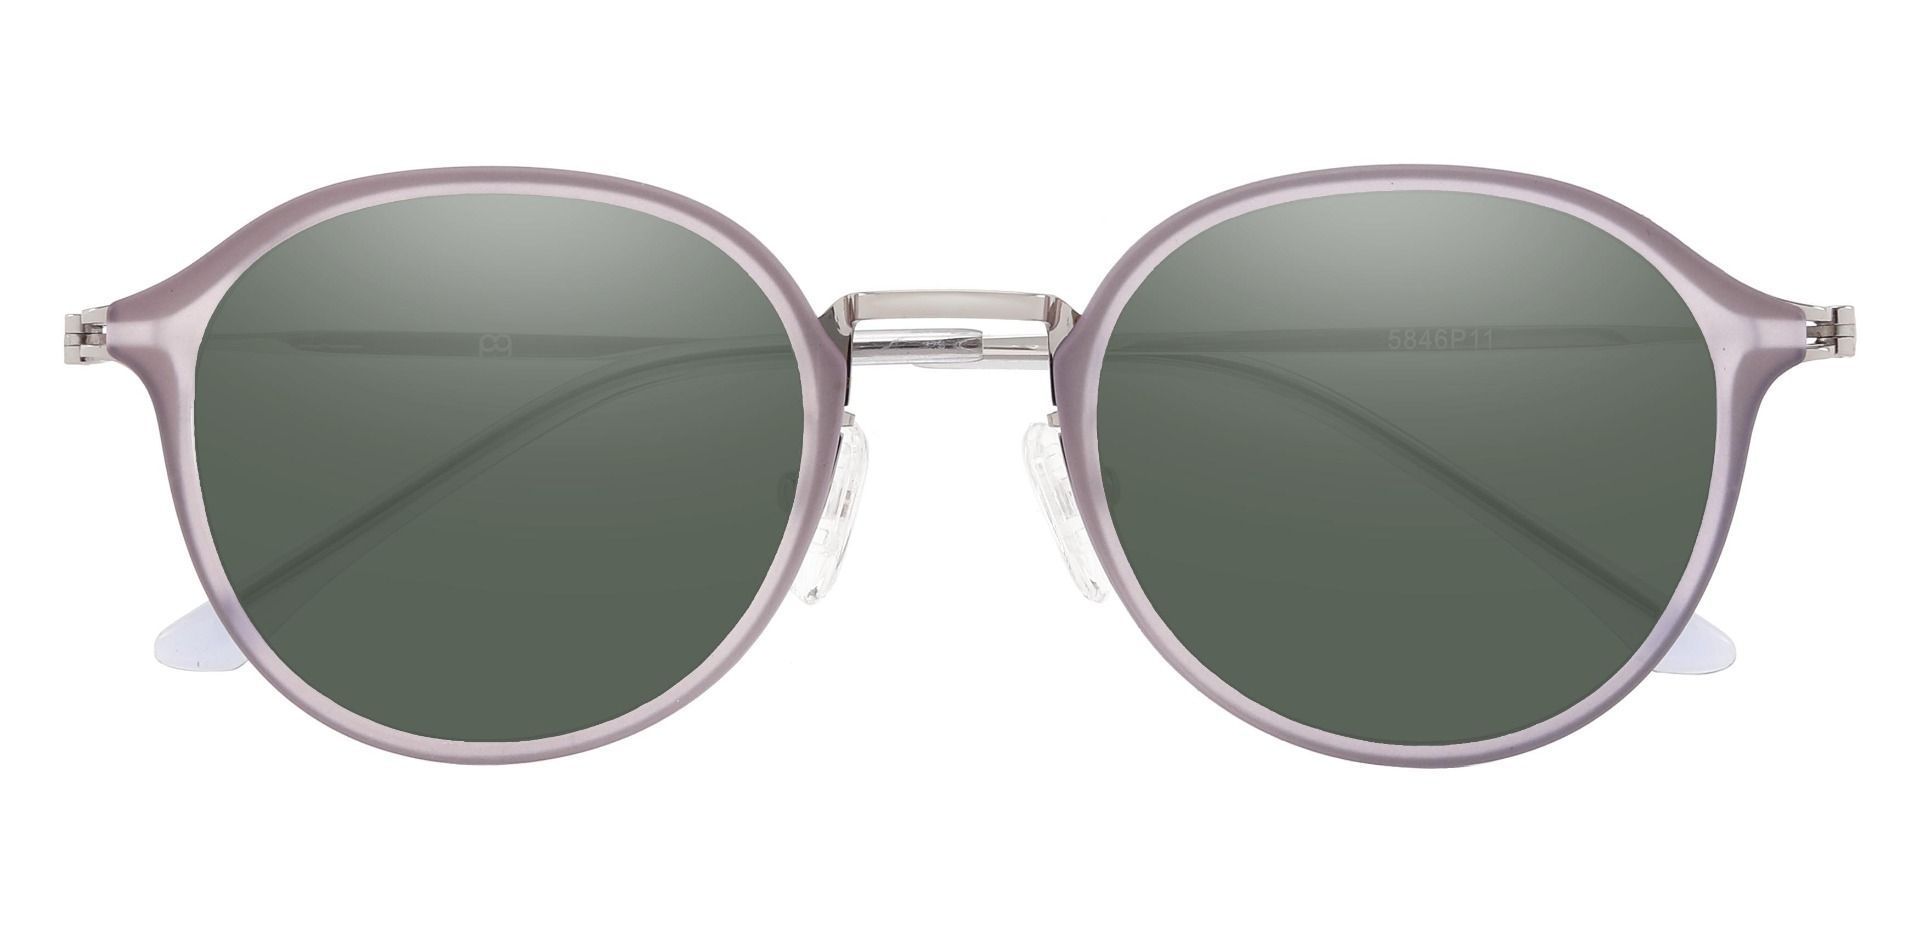 Billings Round Non-Rx Sunglasses - Purple Frame With Green Lenses